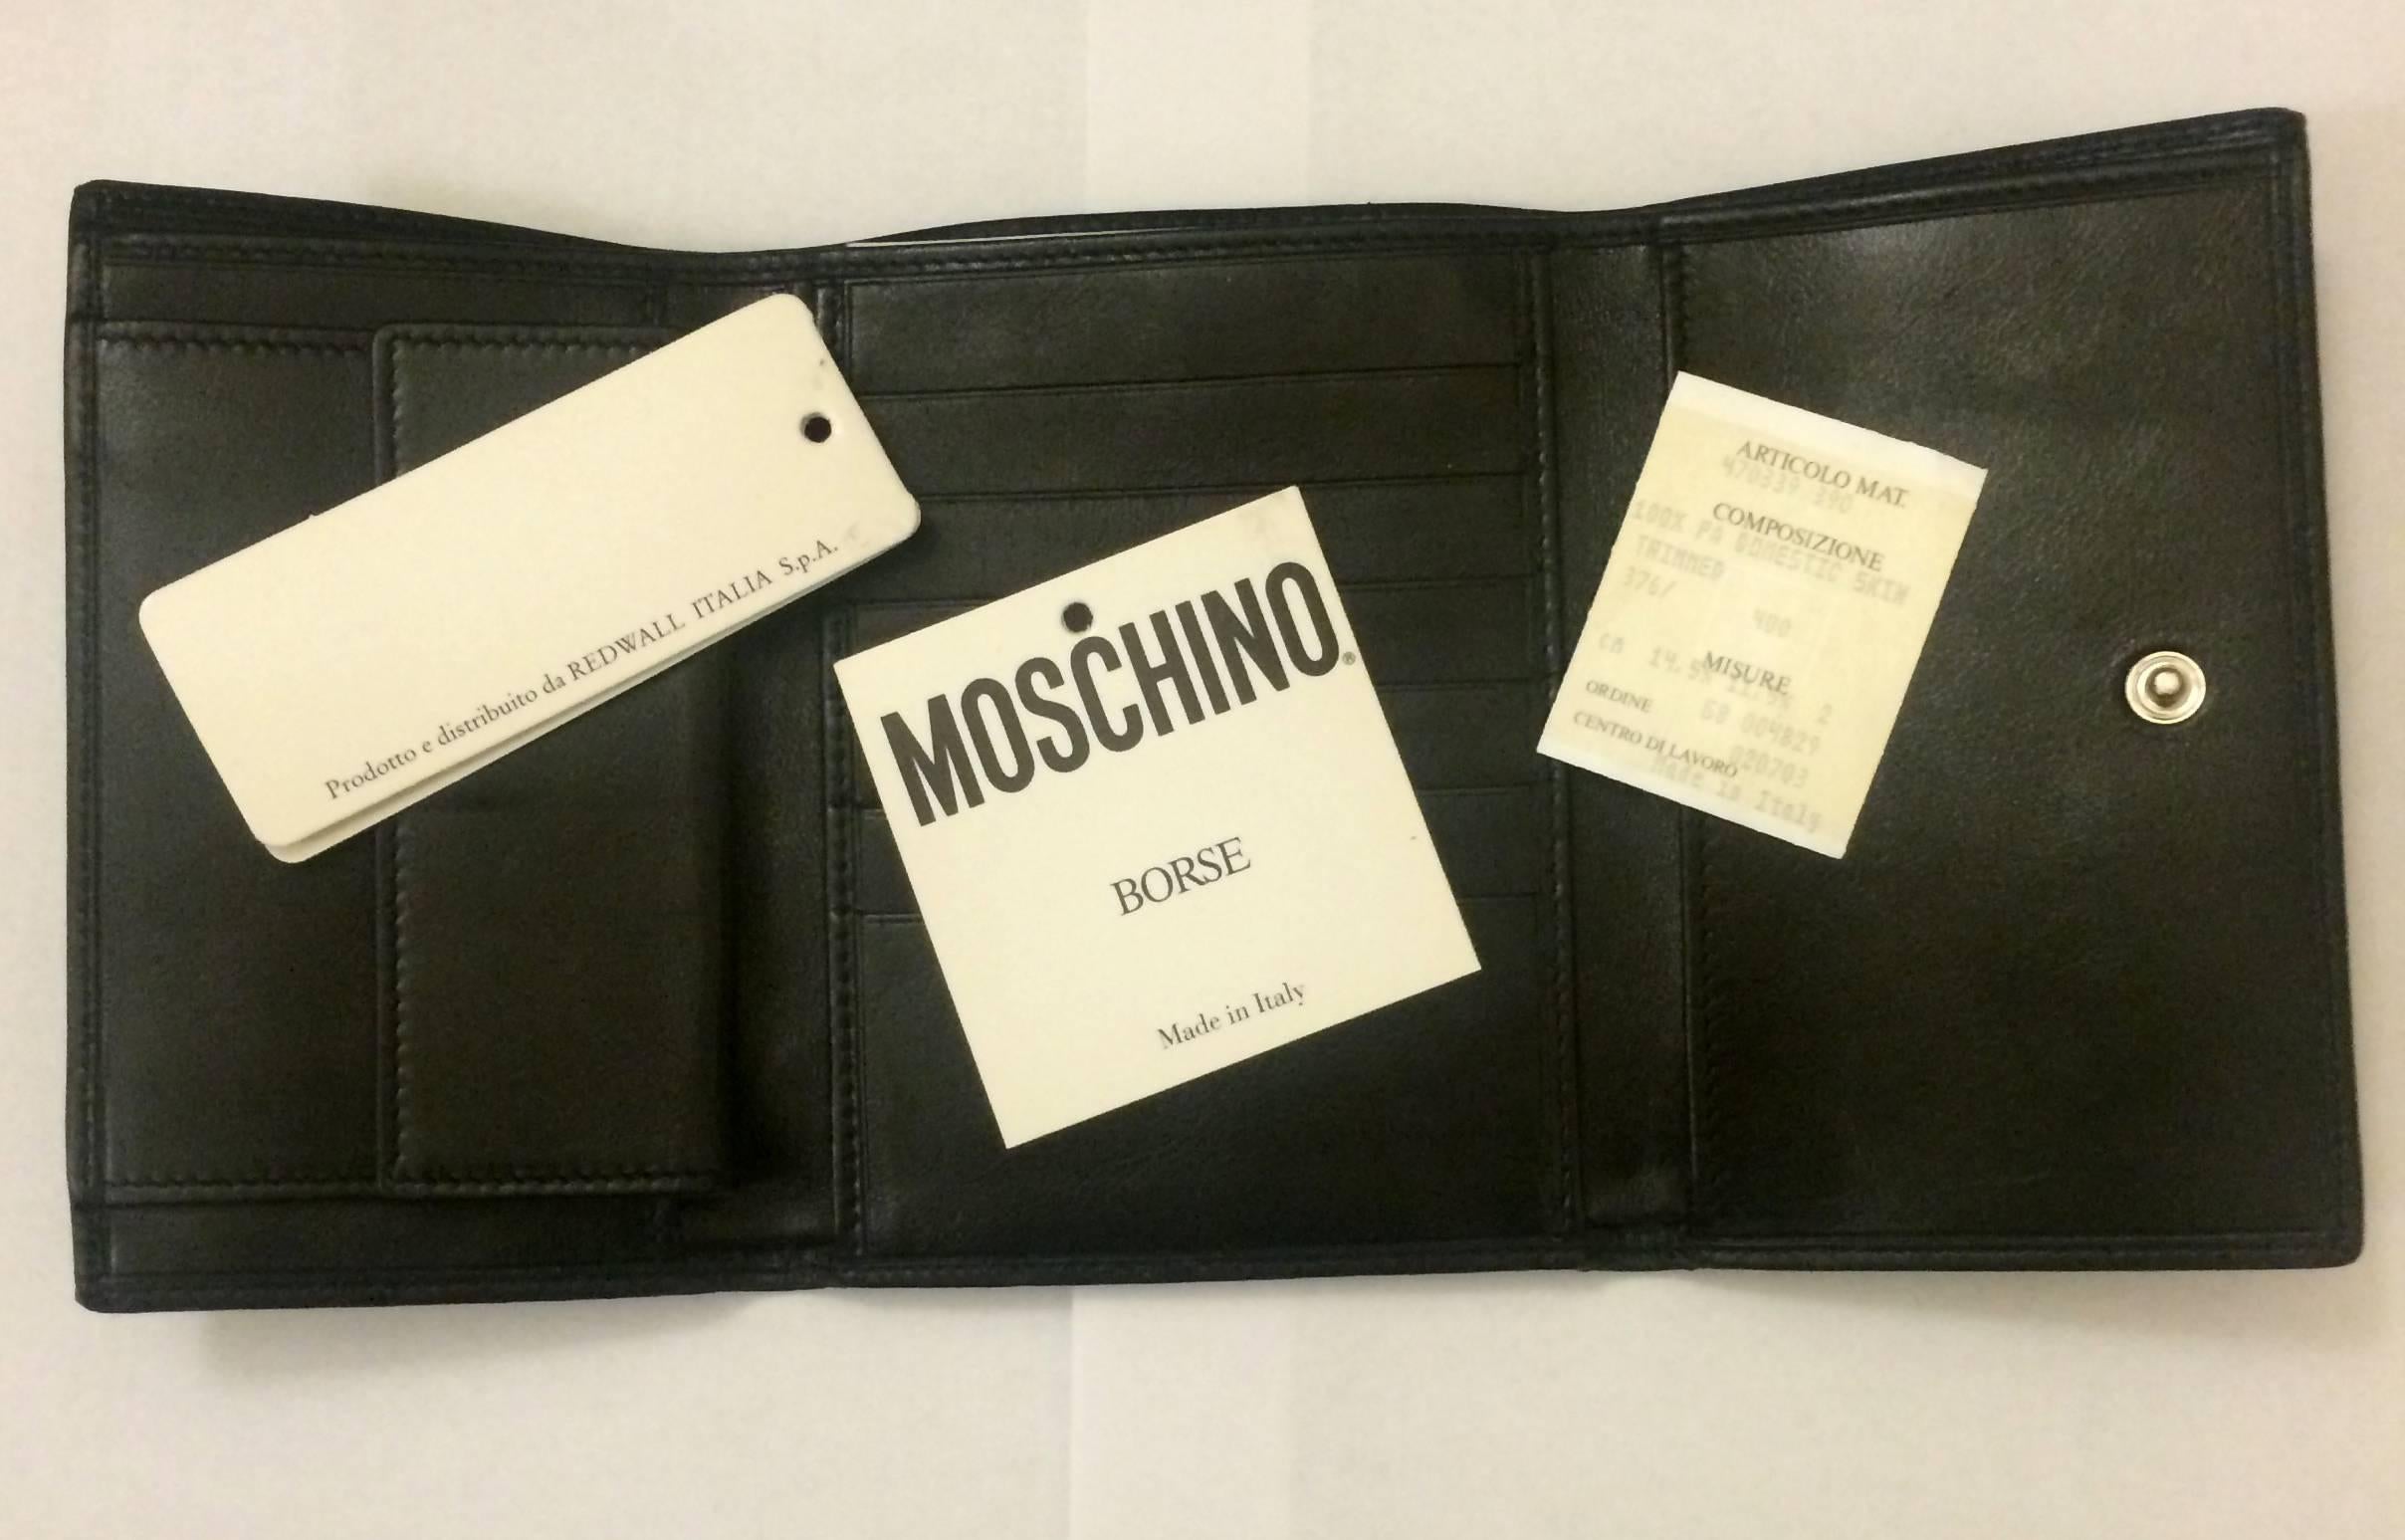 Vintage 90's Moschino by Redwall tri-fold wallet (or mini clutch-- it's so cute you might not want to keep it in your bag!)

Nylon exterior features Moschino branded metal detailing with heart and peace sign. 

Measures approximately 4.5